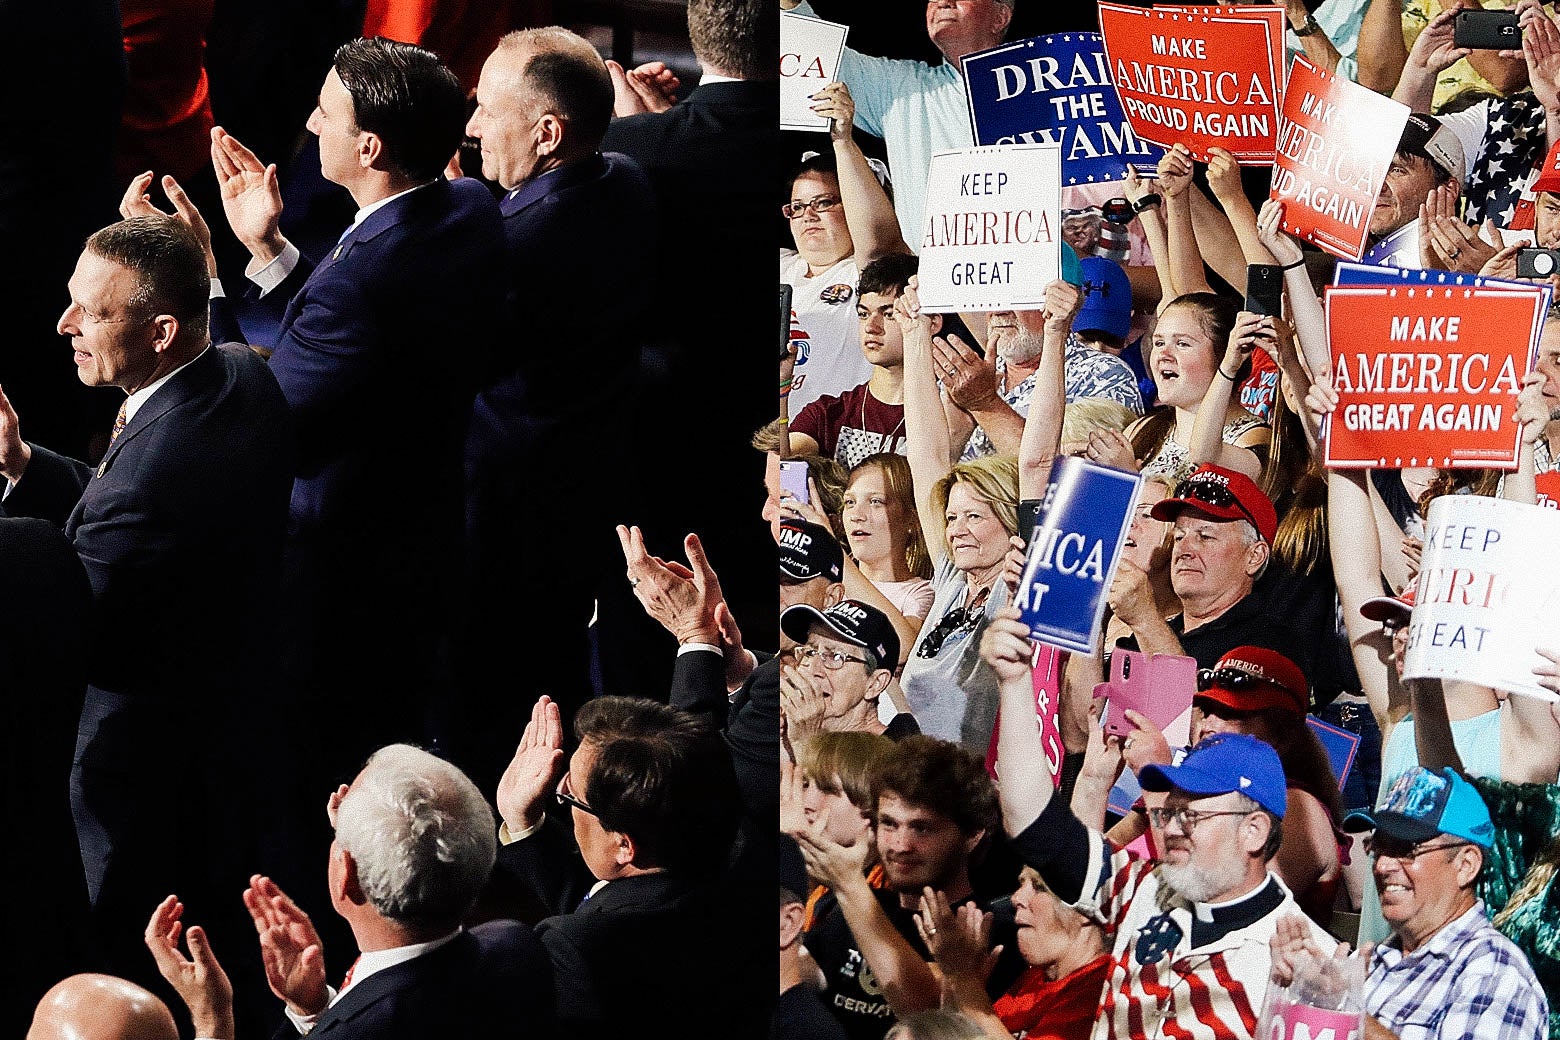 Side-by-side photo illustration: On the left, GOP congressional members clap. On the right, Donald Trump fans hold up election slogan signs that say "Make America Great Again" and "Drain the Swamp," among others.